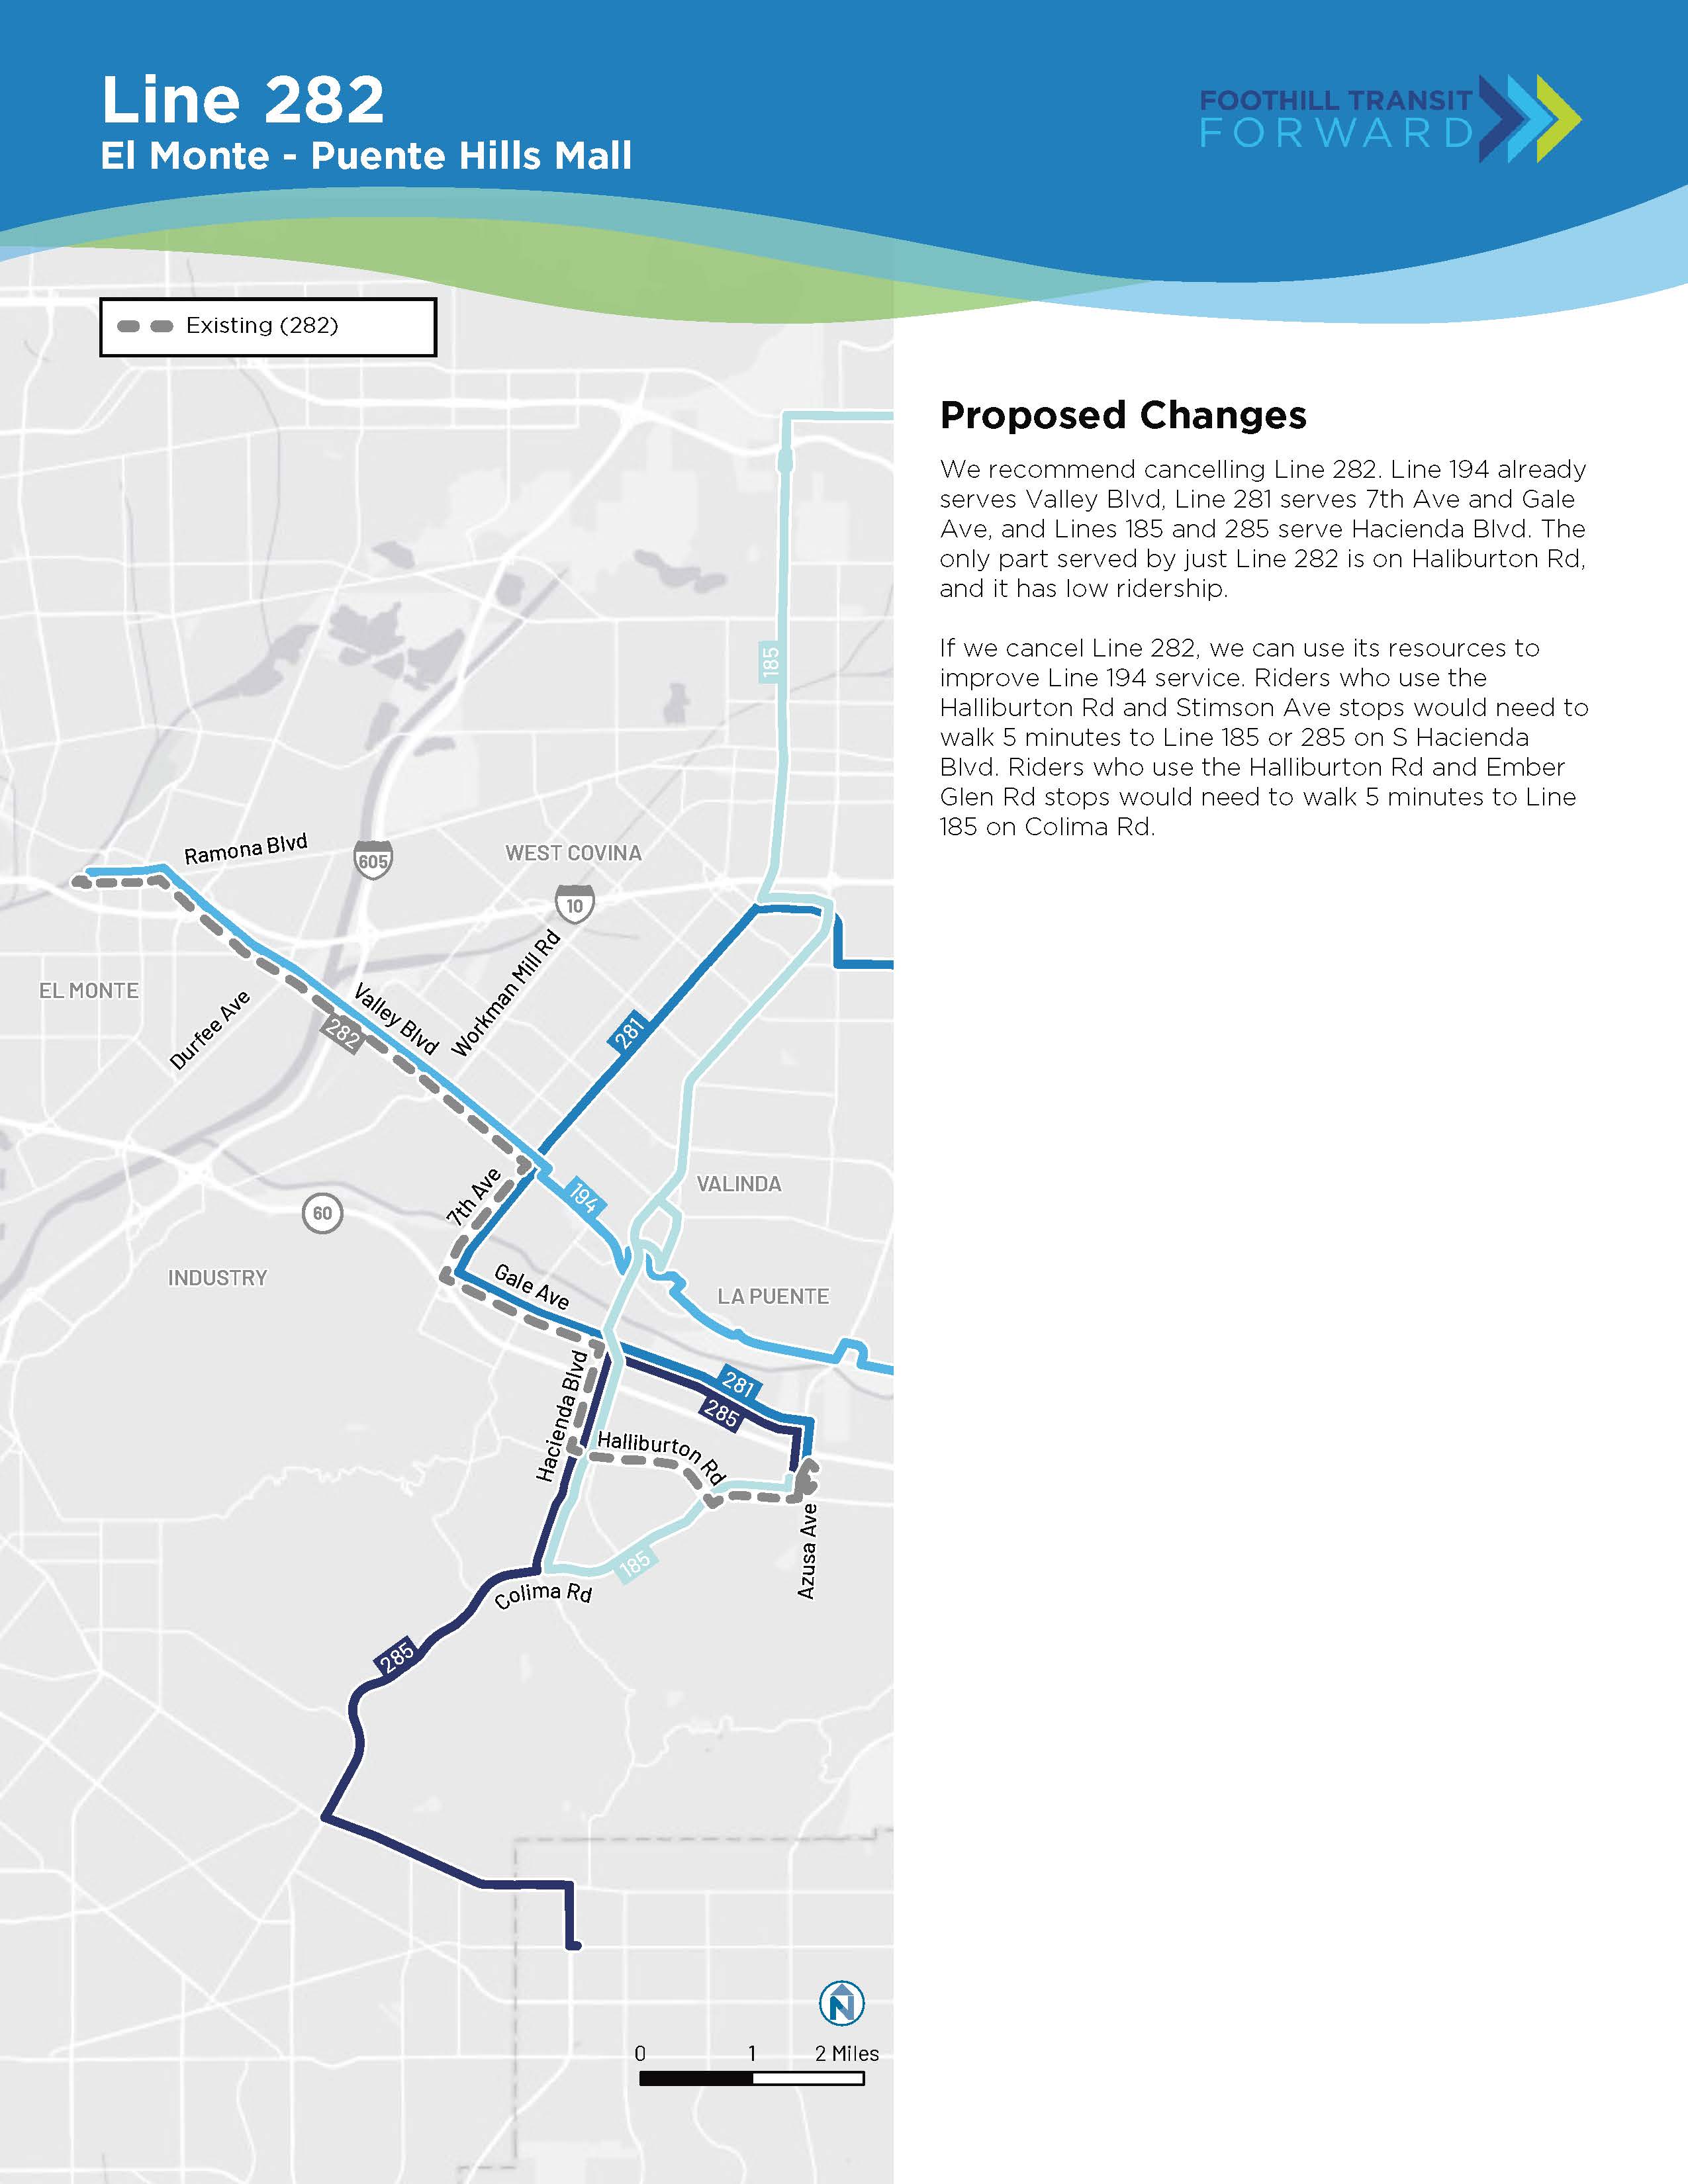 Proposed Changes: Line 282 duplicates Line 194 on Valley Blvd, Line 281 on 7th Ave and Gale Ave, and Lines 185 and 285 on Hacienda Blvd. The only unique part is on Haliburton Rd, and it has low ridership. If we cancel Line 282, we can use its funding to improve Line 194. Riders who use Halliburton Rd/Stimson Ave would need to walk 5 minutes to Line 185 or 285 on Hacienda Blvd. Riders who use Halliburton Rd/Ember Glen Rd would need to walk 5 minutes to Line 185 on Colima Rd.  